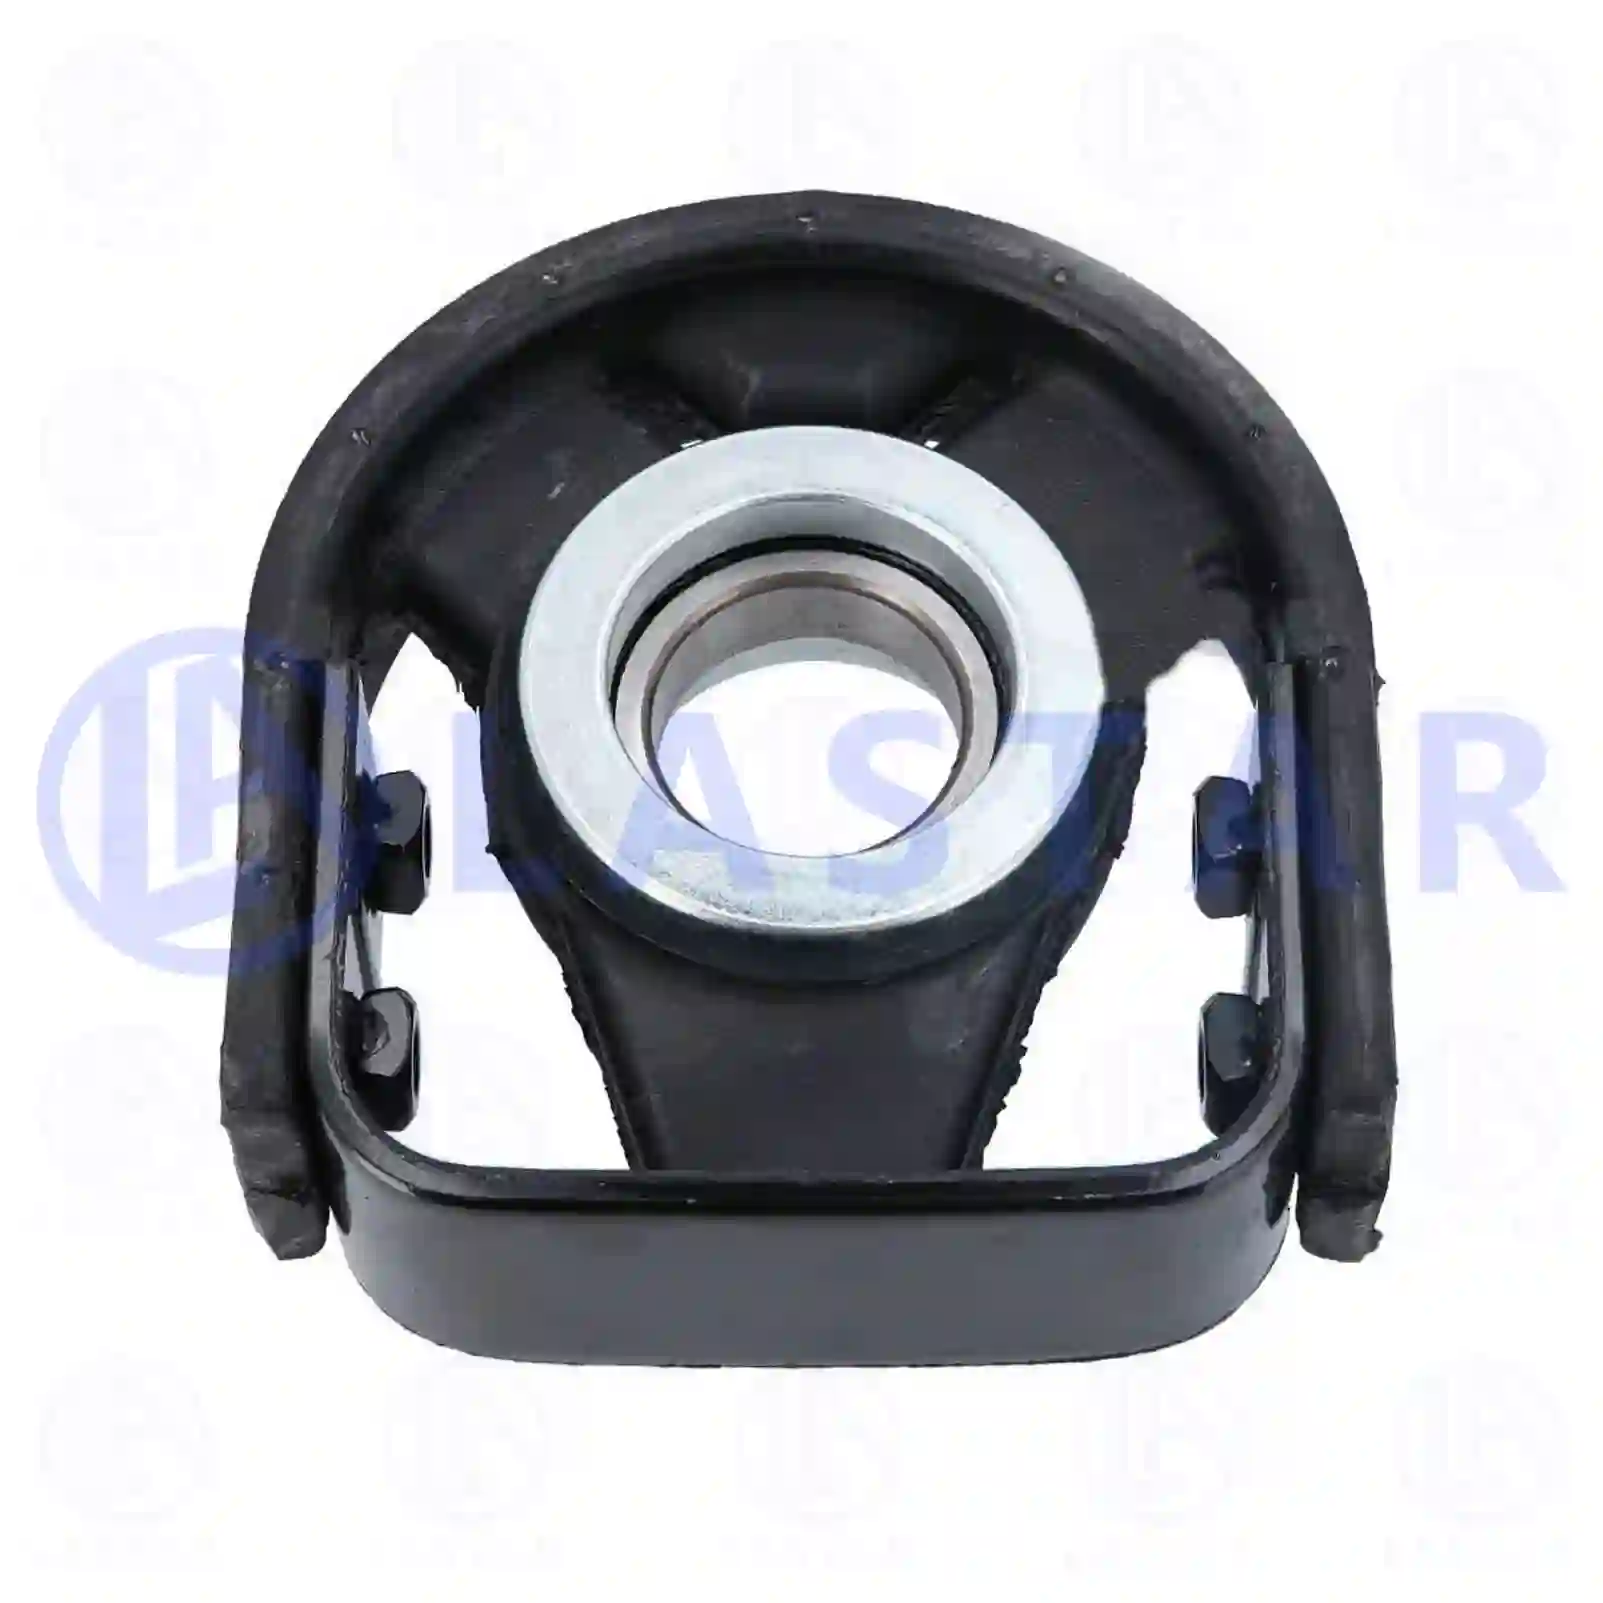 Support Bearing Center bearing, la no: 77734195 ,  oem no:0004110212, 9704110012, 9704110112, ZG02487-0008 Lastar Spare Part | Truck Spare Parts, Auotomotive Spare Parts